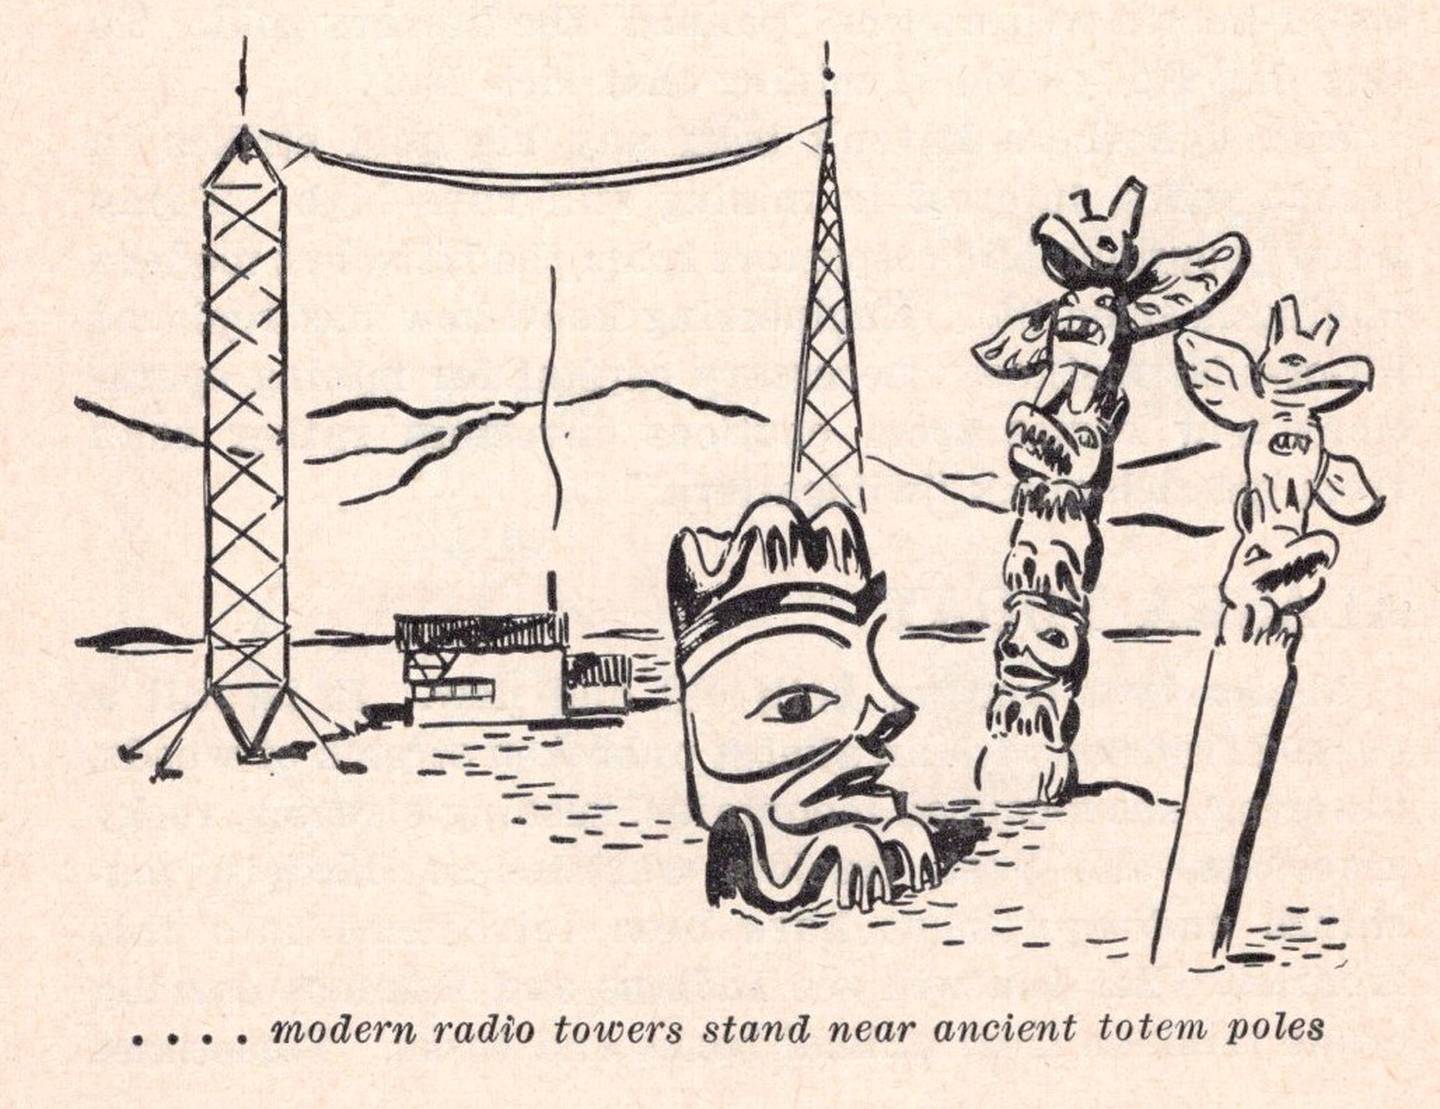 An illustration from the 1956 Pocket Guide to Alaska